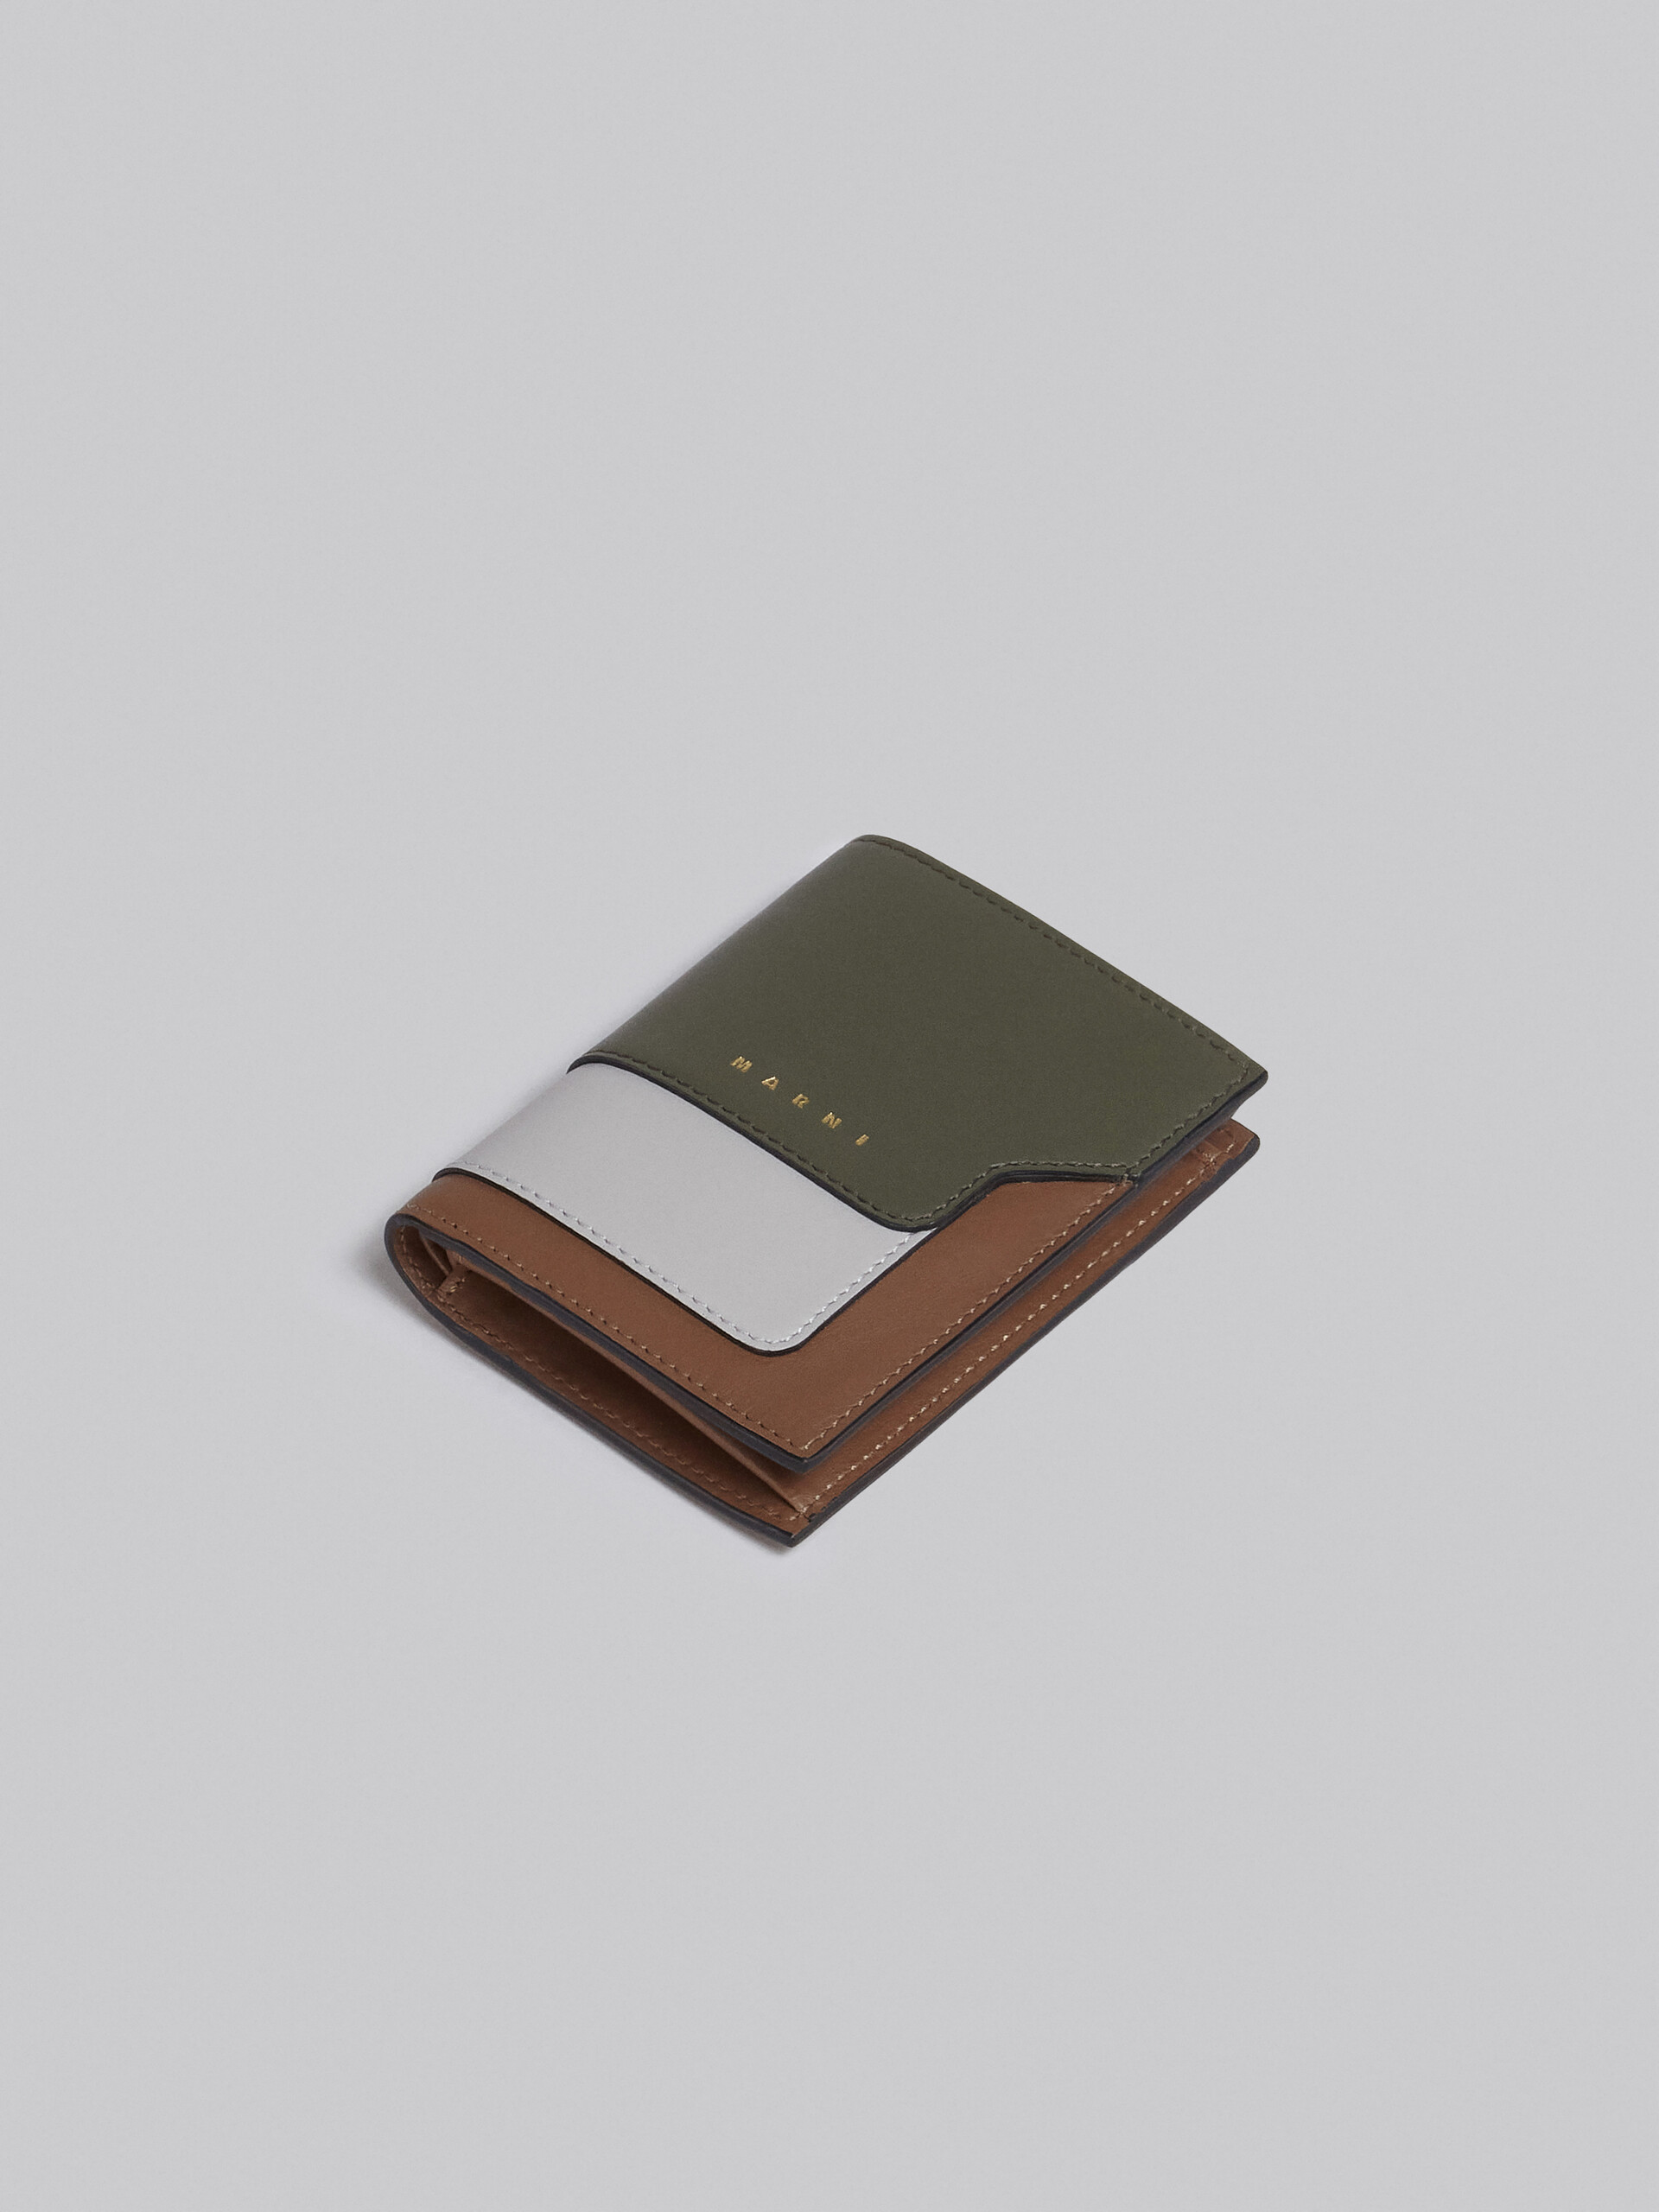 Green grey and brown leather bi-fold wallet - Wallets - Image 5